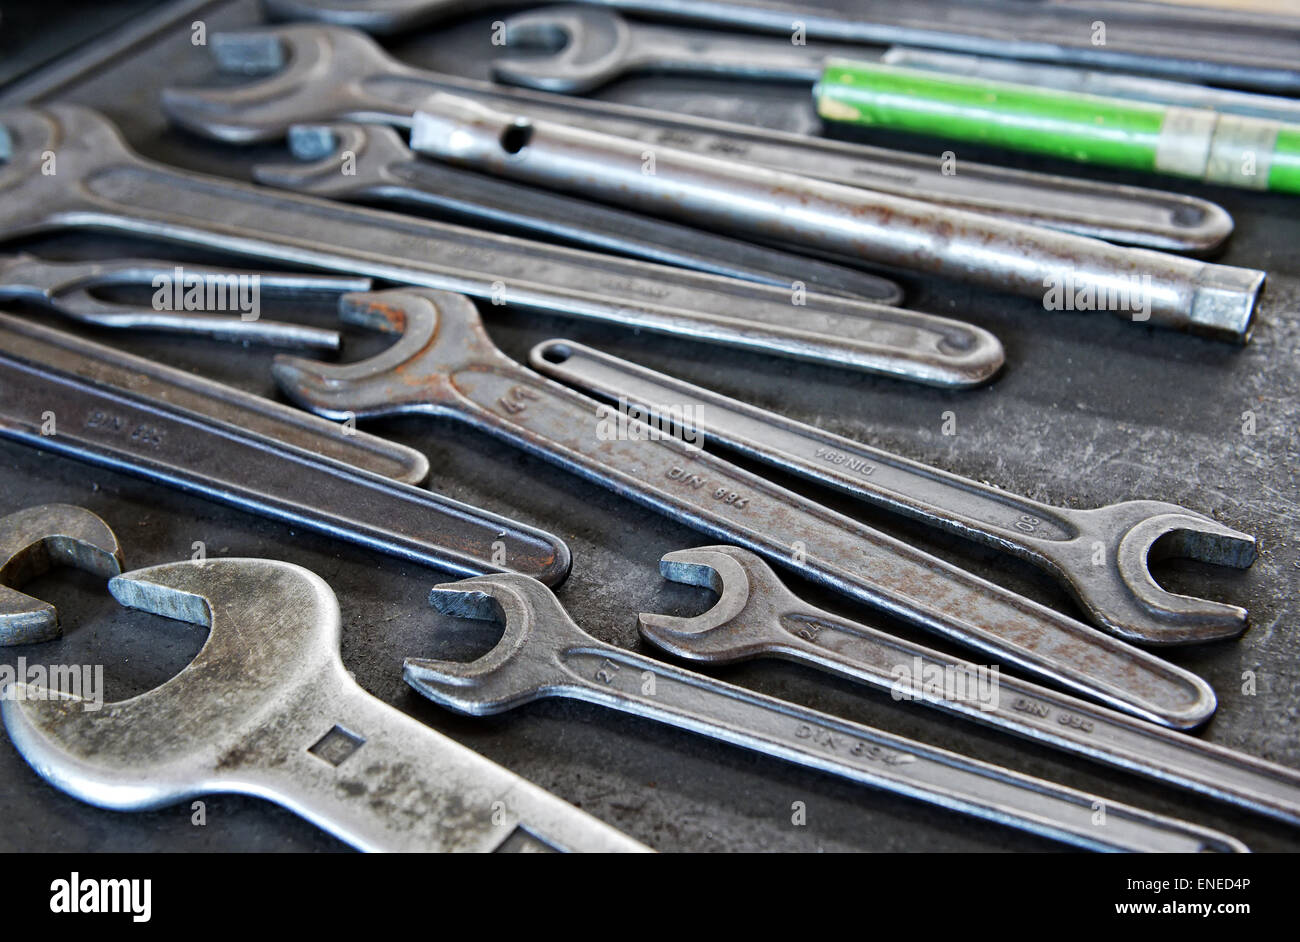 Still Life Close Up of Collection of Well-Used Metal Wrenches in Variety of Sizes on Work Tray Stock Photo